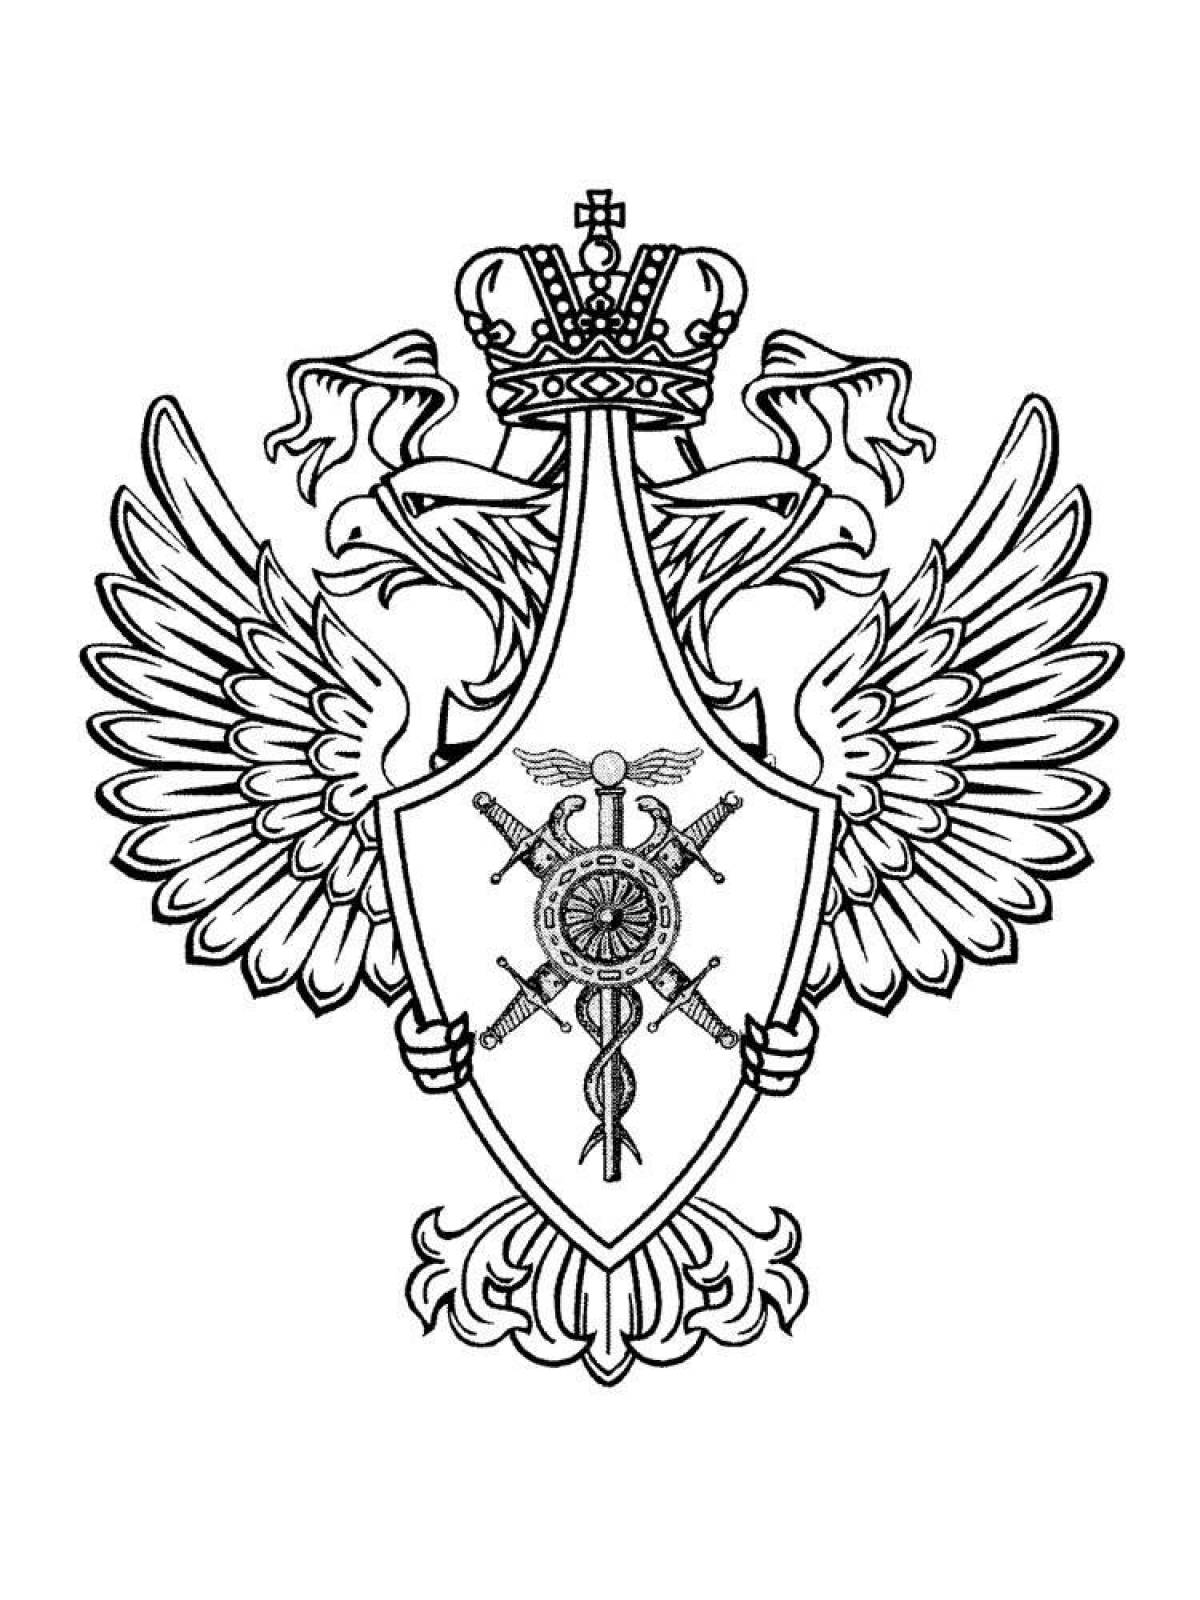 Russian coat of arms #15